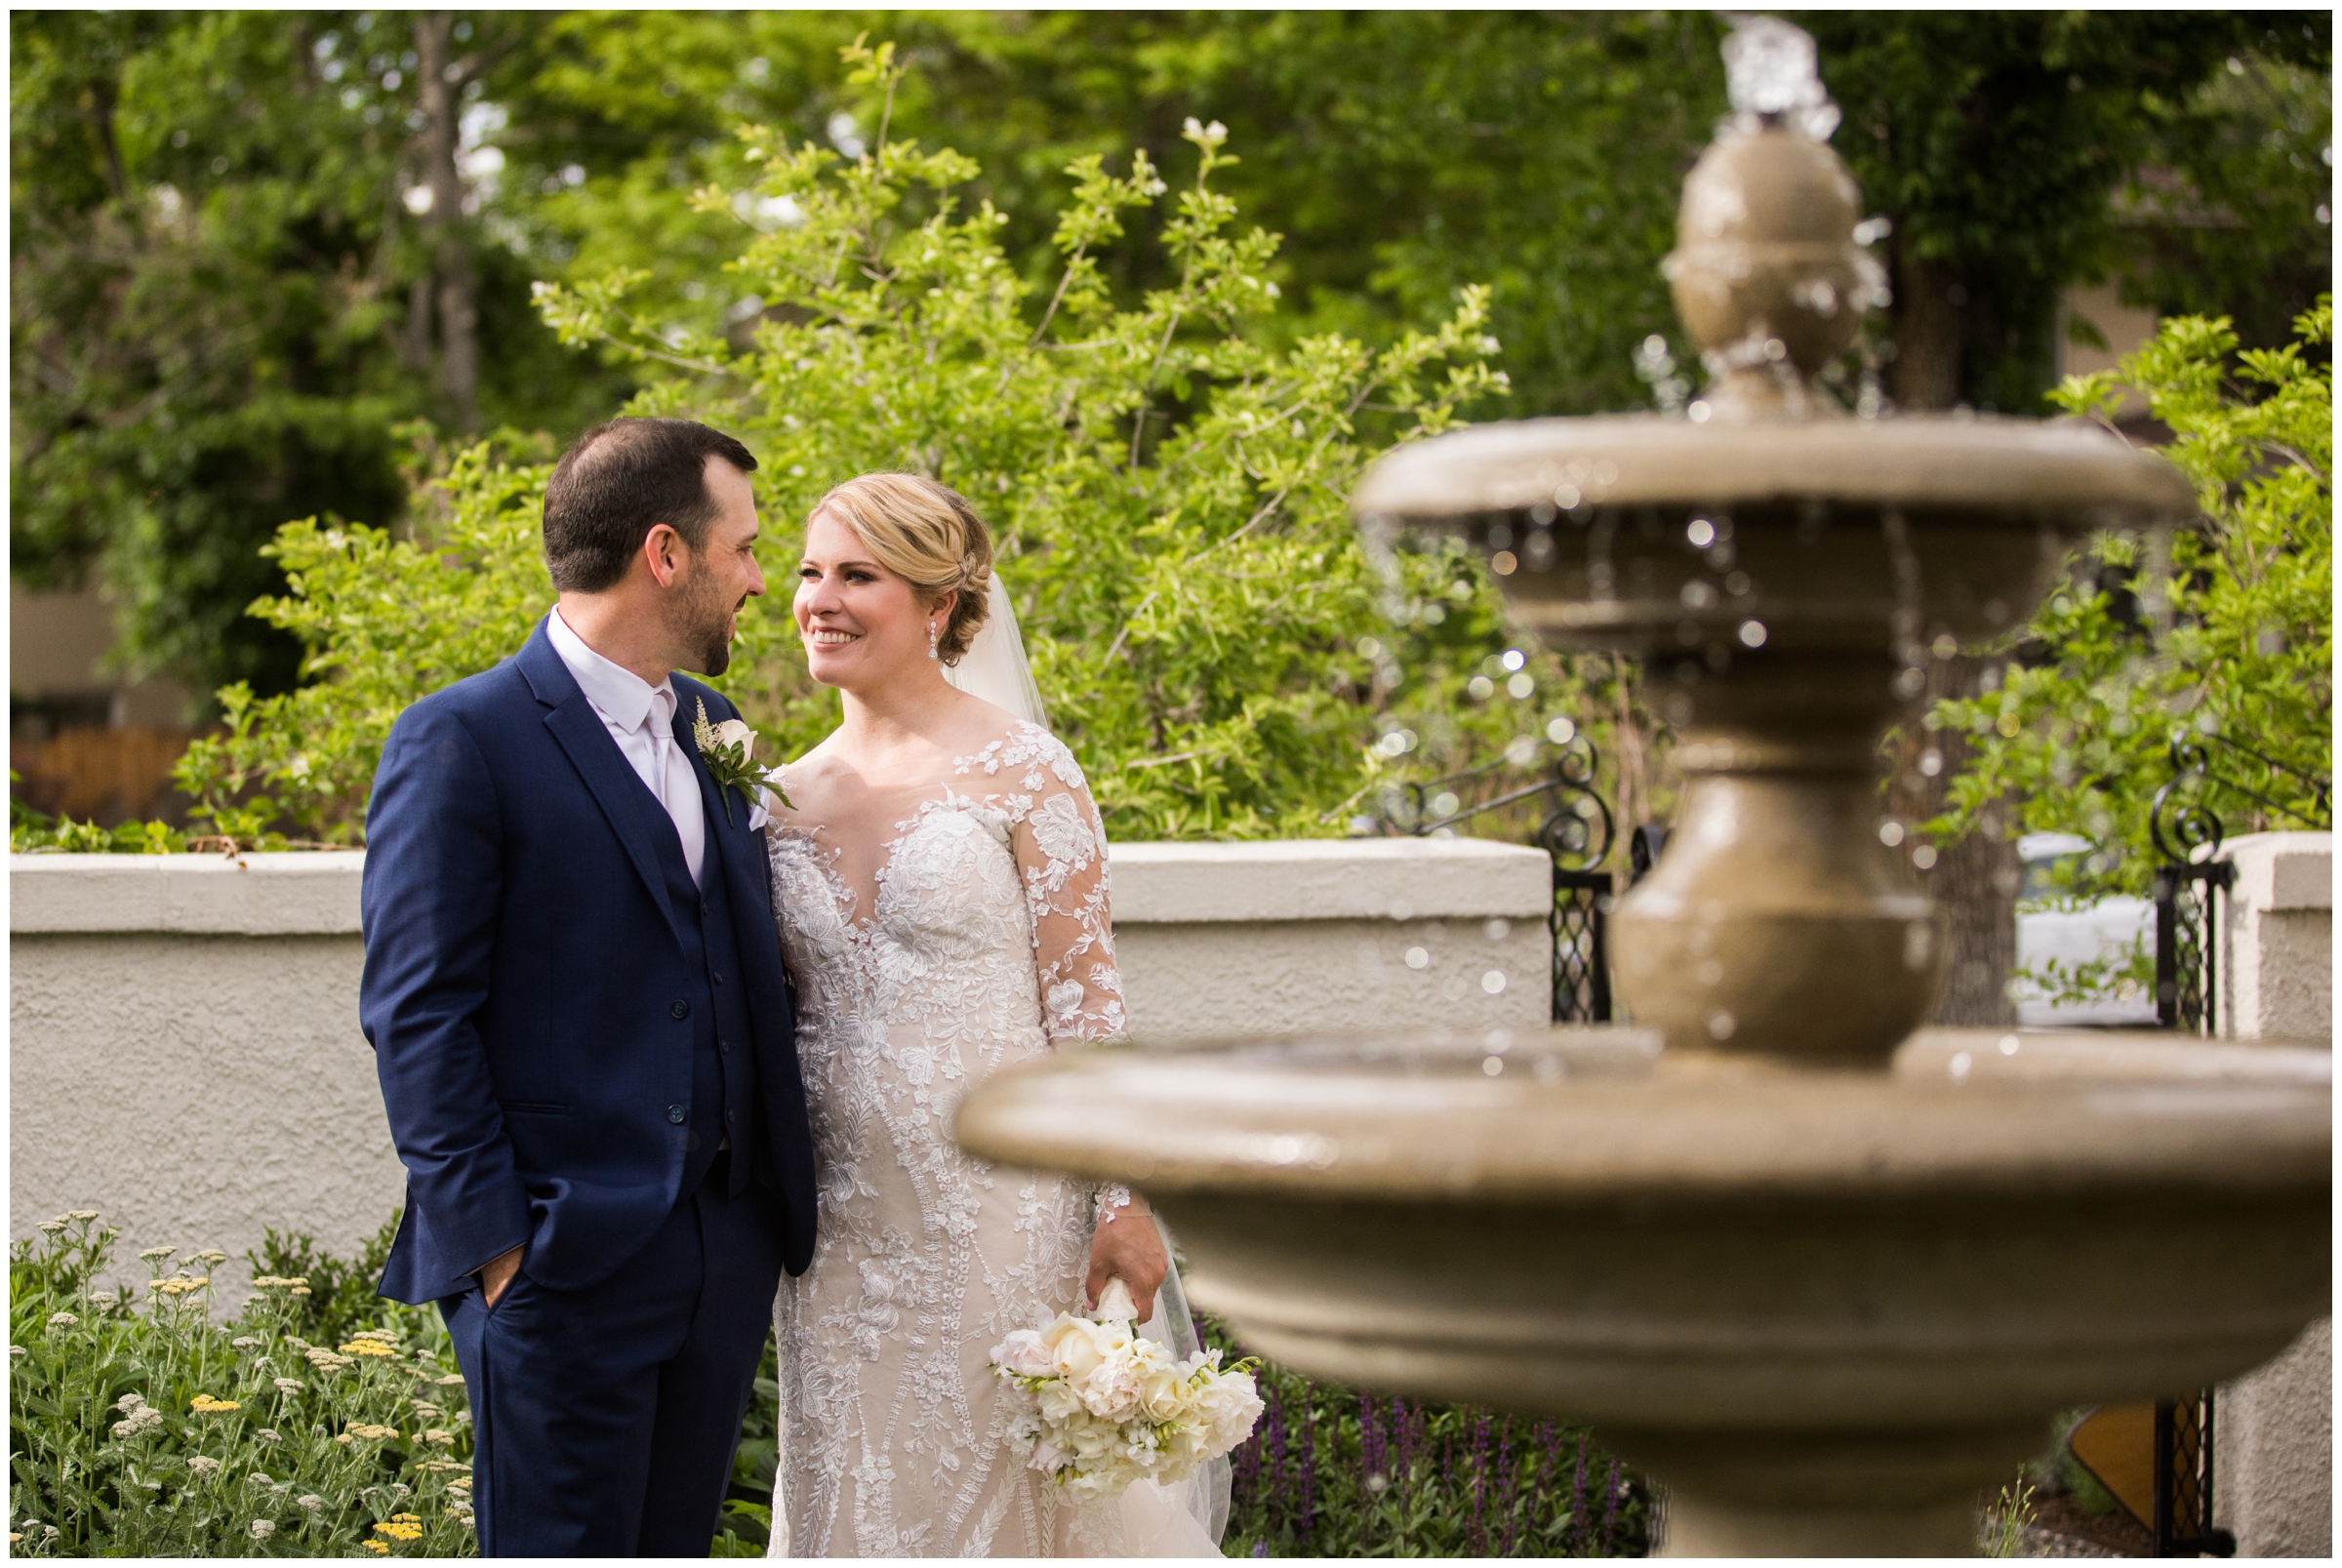 Cherry Creek wedding photos at intimate Denver wedding at private home by Plum Pretty Photography